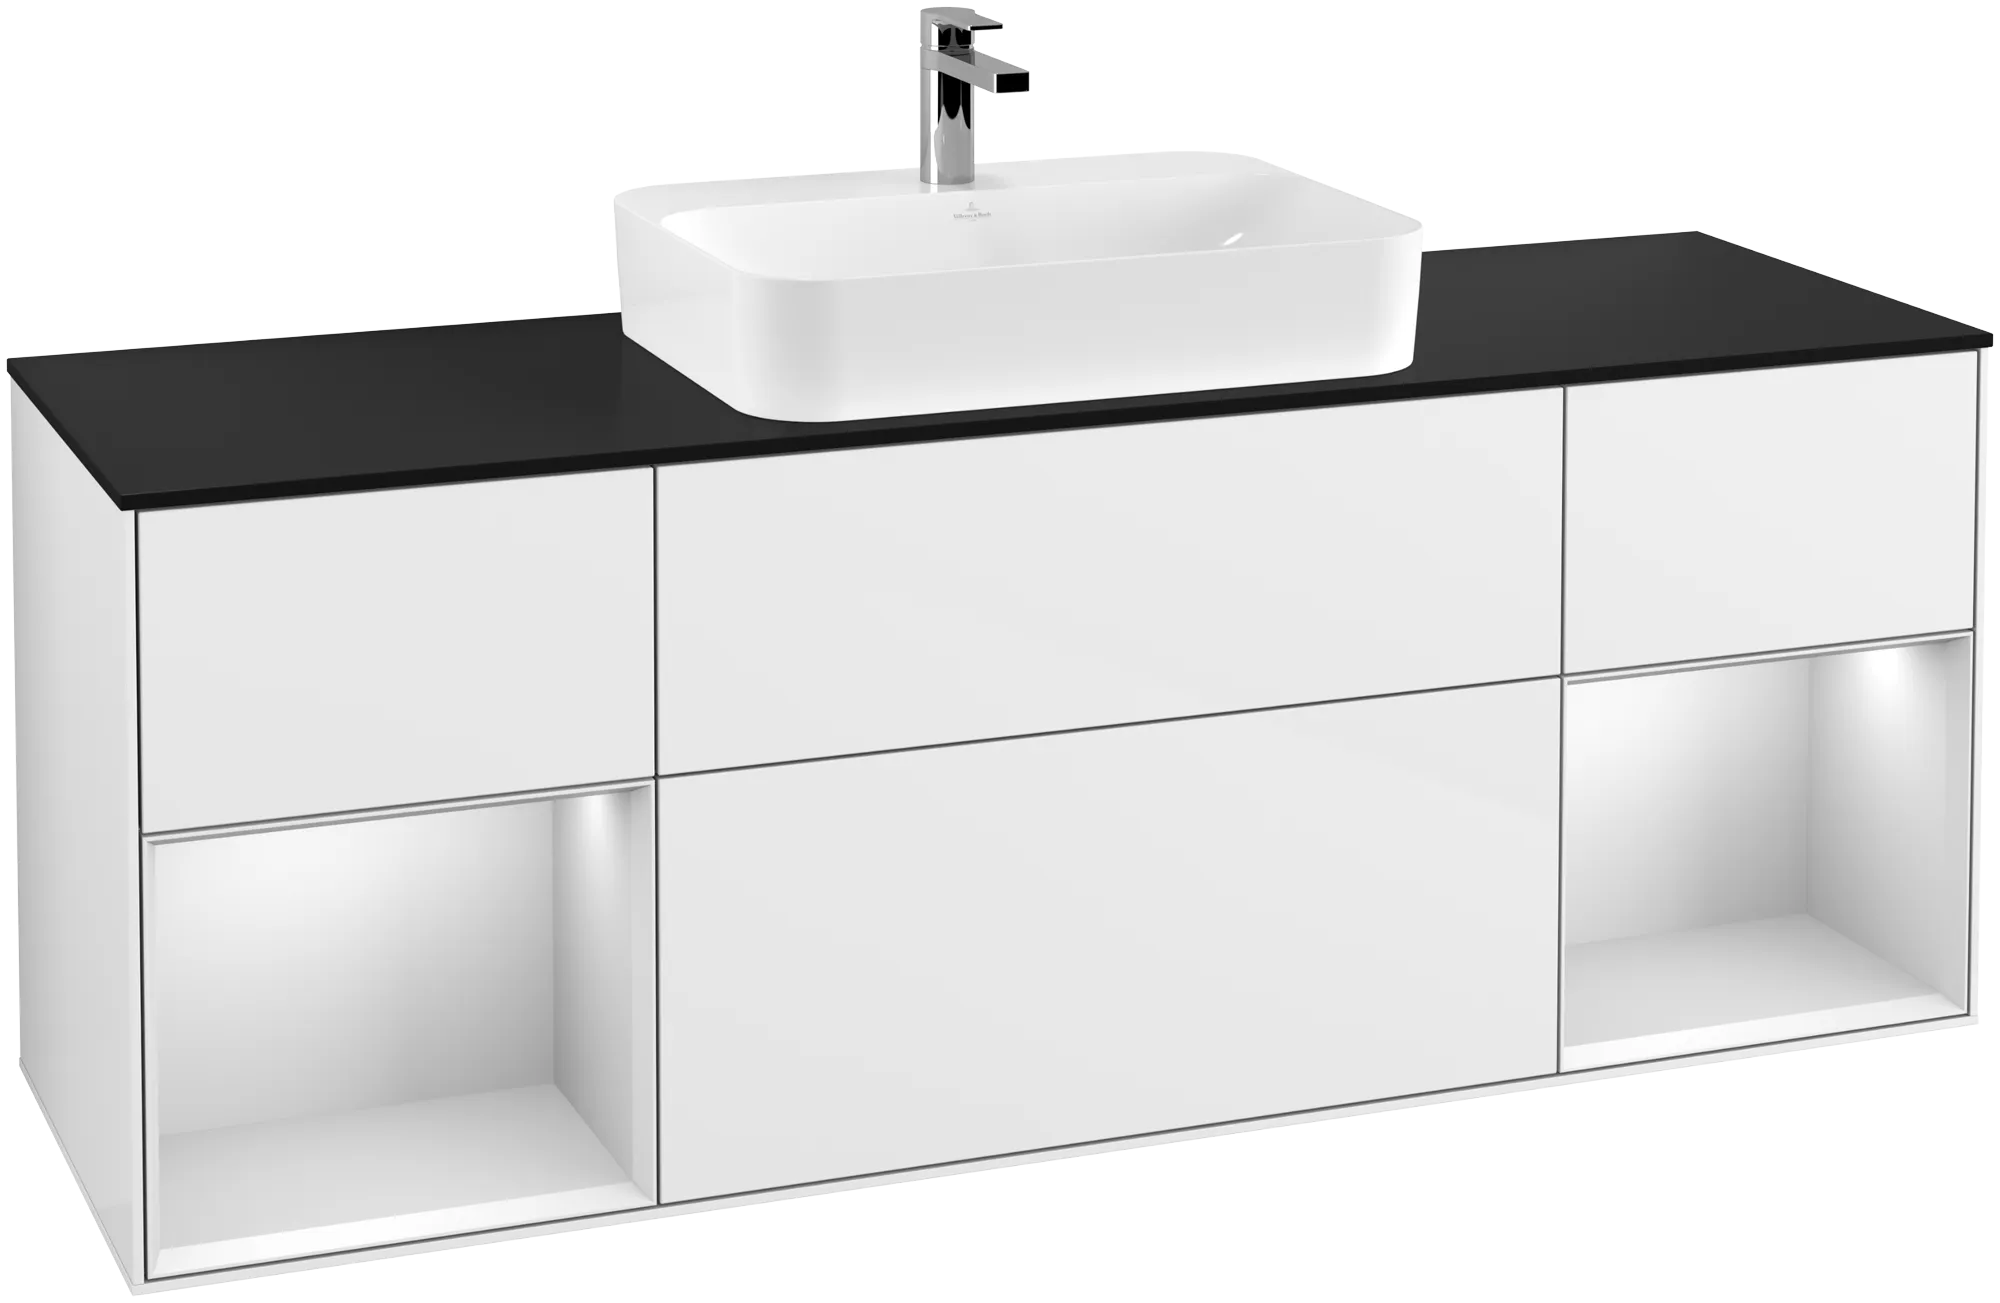 Obrázek VILLEROY BOCH Finion Vanity unit, with lighting, 4 pull-out compartments, 1600 x 603 x 501 mm, Glossy White Lacquer / White Matt Lacquer / Glass Black Matt #G452MTGF